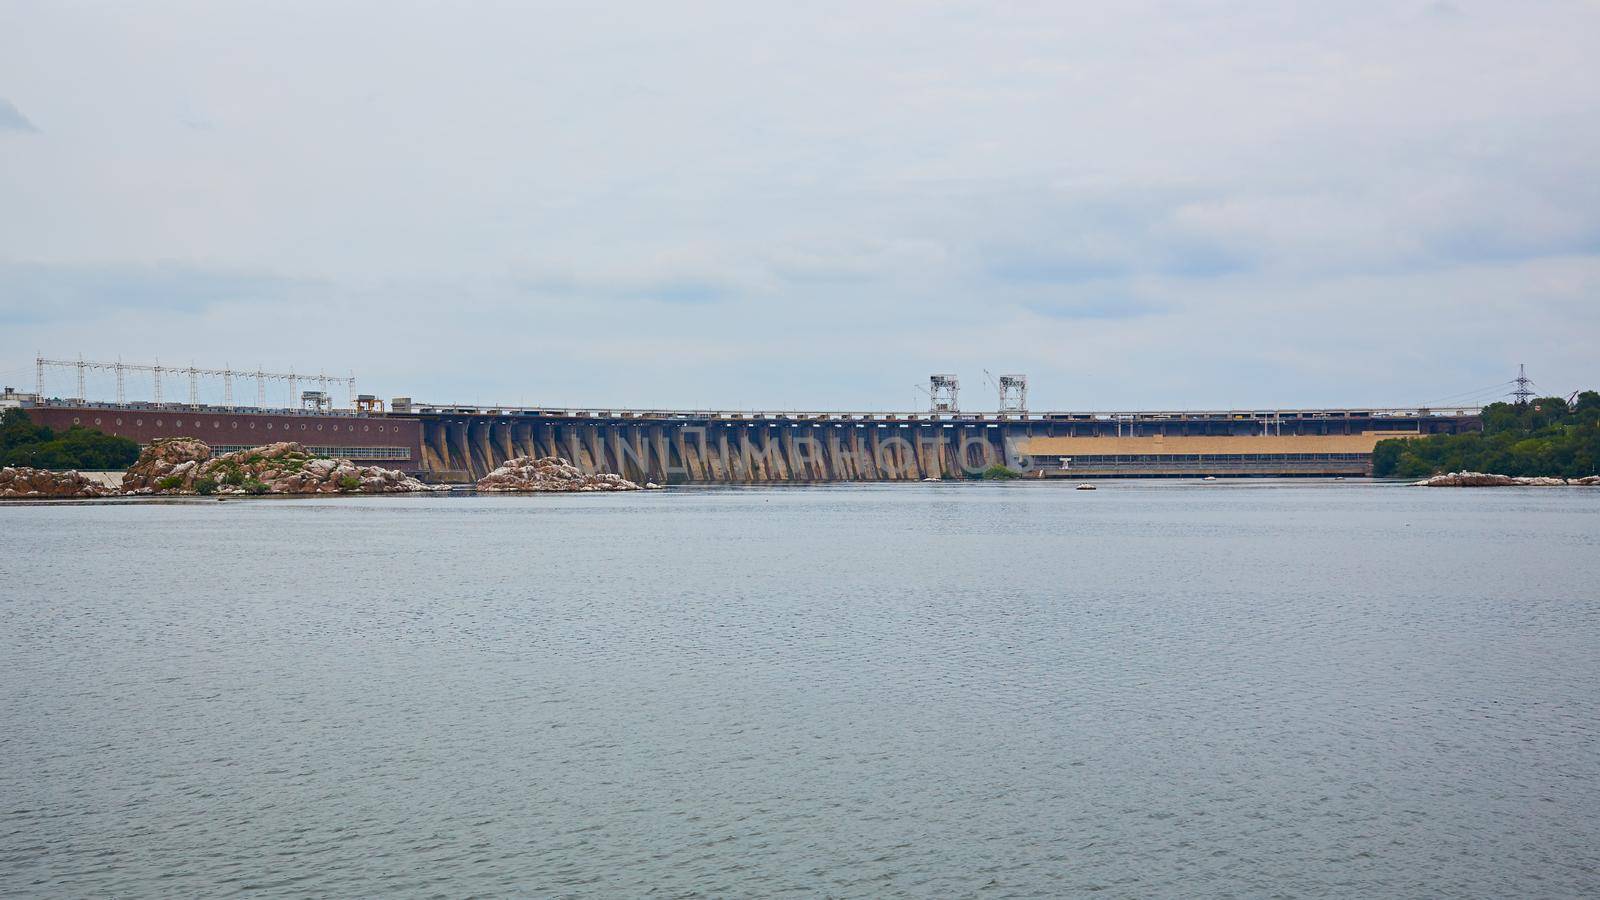 DniproGES in Zaporozhye. Hydroelectric power station on the Dnipro River by sarymsakov